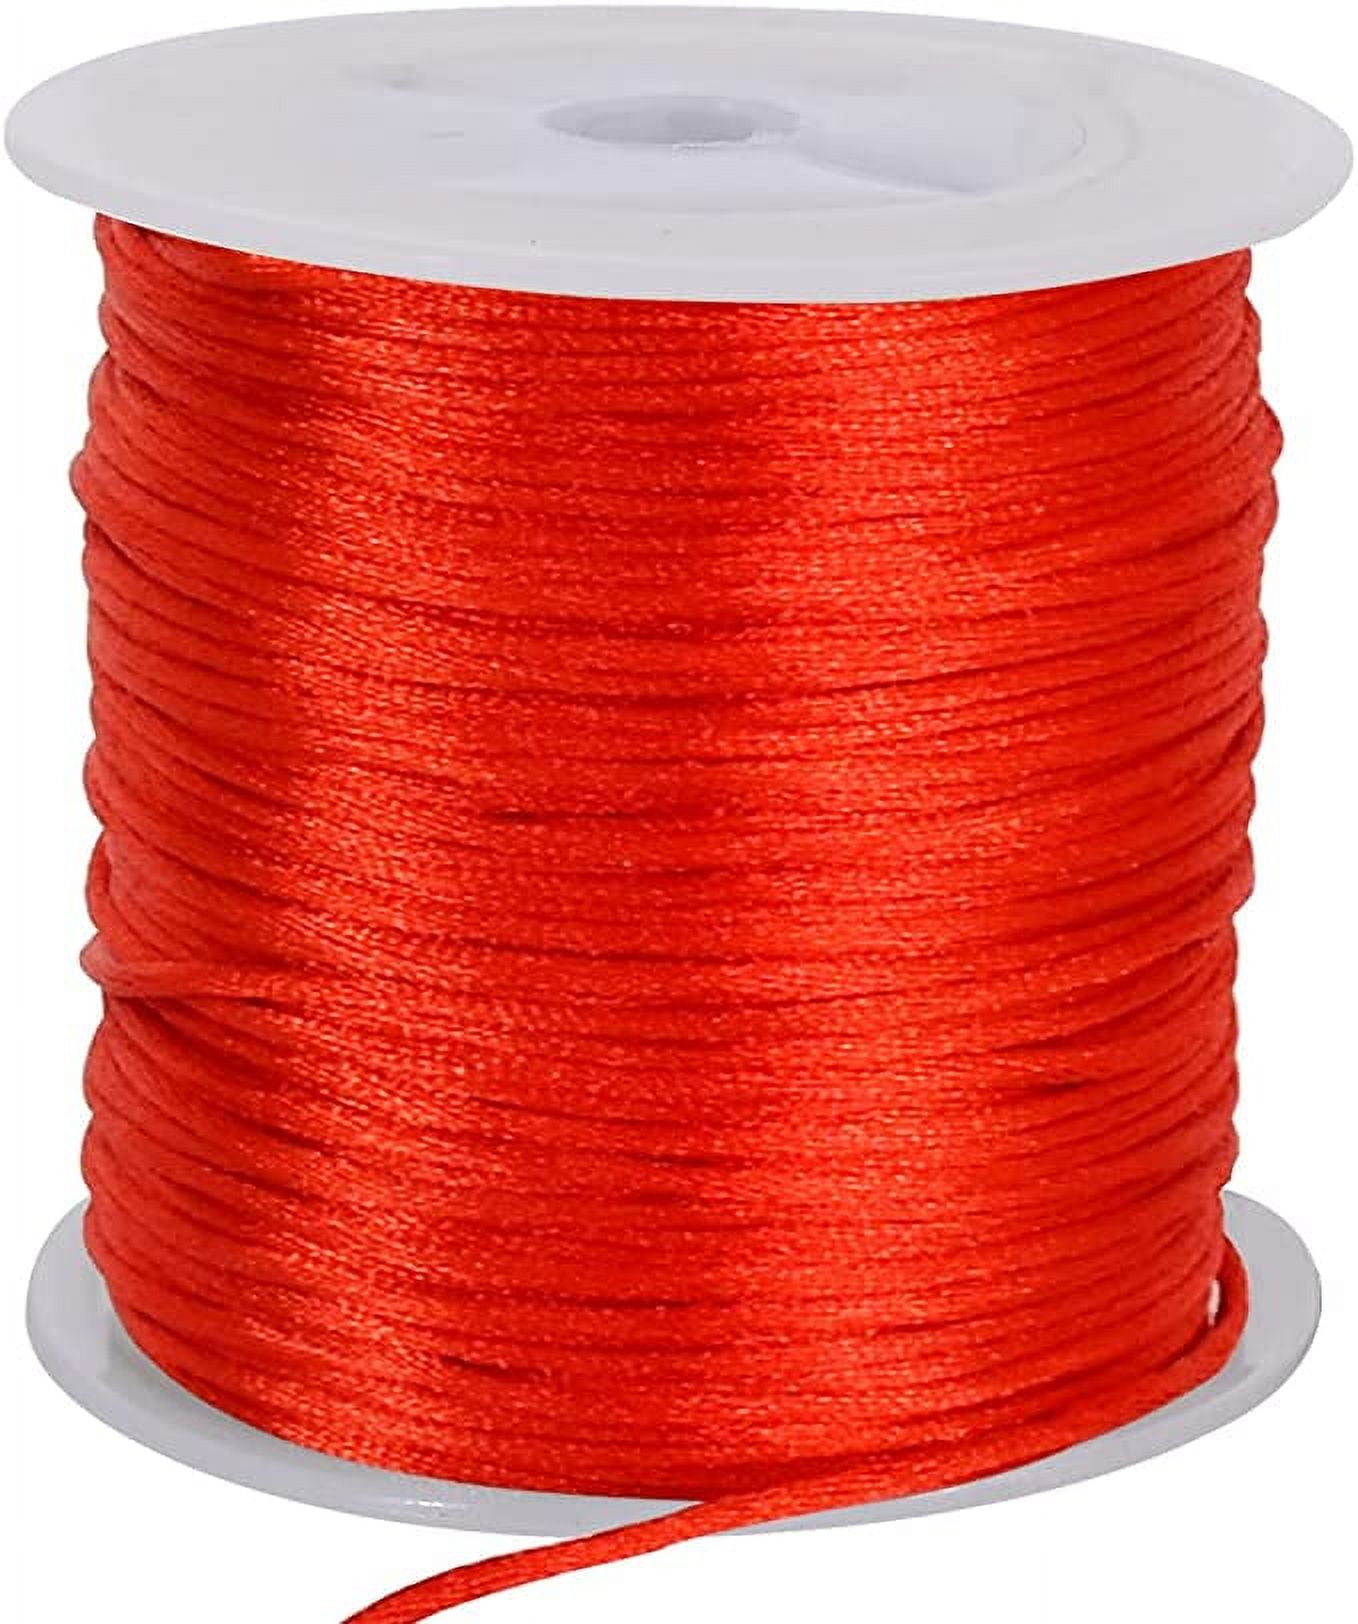 Expo International Elastic String Cord, 1 mm Wide Premium Stretchy String Cord for Jewelry Making, Thin Bracelet Cord, Versatile Jewelry Cord, Roll/